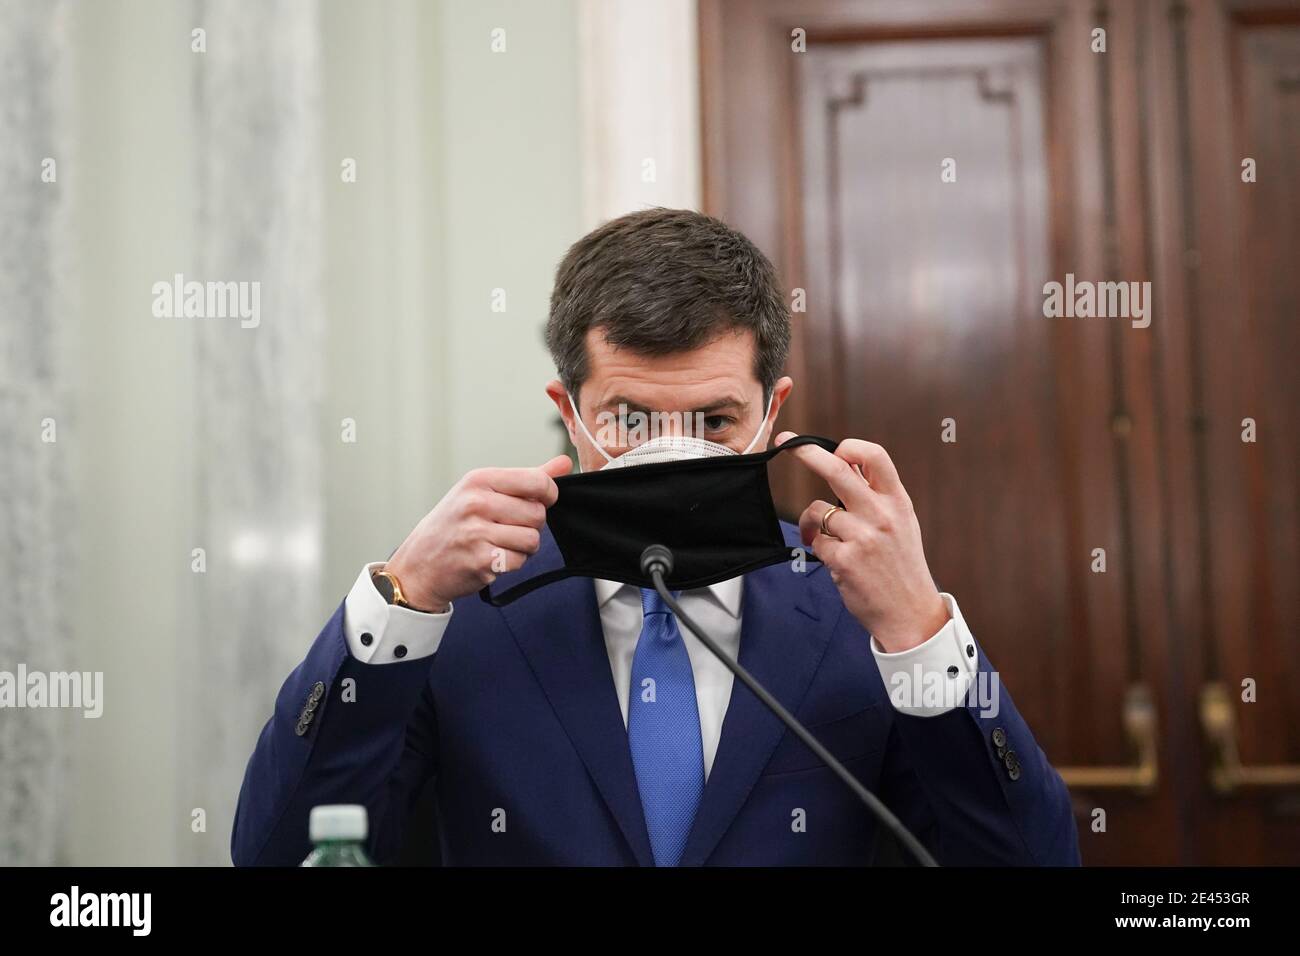 Washington, DC, USA. 21st Jan, 2021. Pete Buttigieg, U.S. secretary of transportation nominee for U.S. President Joe Biden, puts on a protective mask during a Senate Commerce, Science and Transportation Committee confirmation hearing in Washington, DC, U.S., on Thursday, Jan. 21, 2021. Buttigieg, is pledging to carry out the administration's ambitious agenda to rebuild the n sation's infrastructure, calling it a 'generational opportunity' to create new jobs, fight economic inequality and stem climate change. Credit: Stefani Reynolds/Pool via CNP | usage worldwide Credit: dpa/Alamy Live News Stock Photo